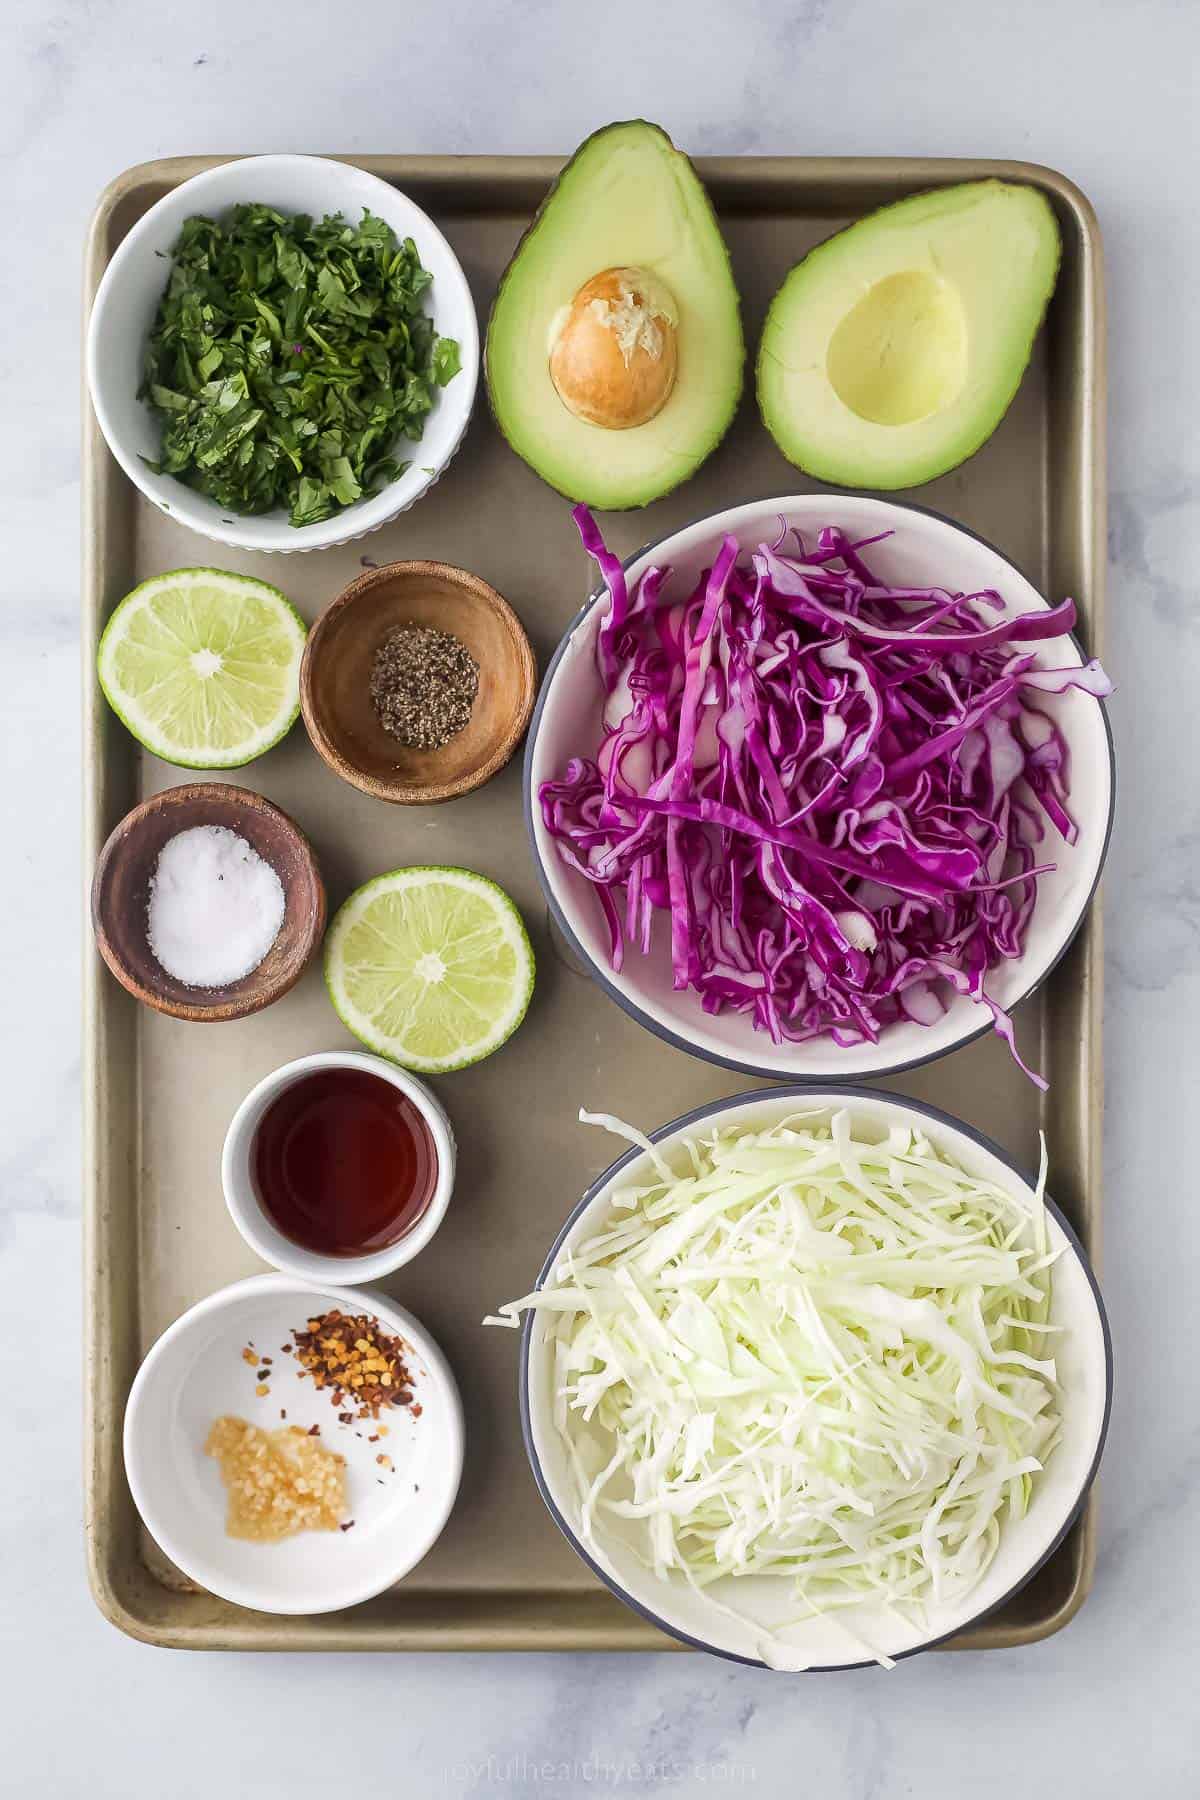 ingredients to make creamy coleslaw for fish tacos includig shredded cabbage, limes, avocado, cilantro, and seasonings